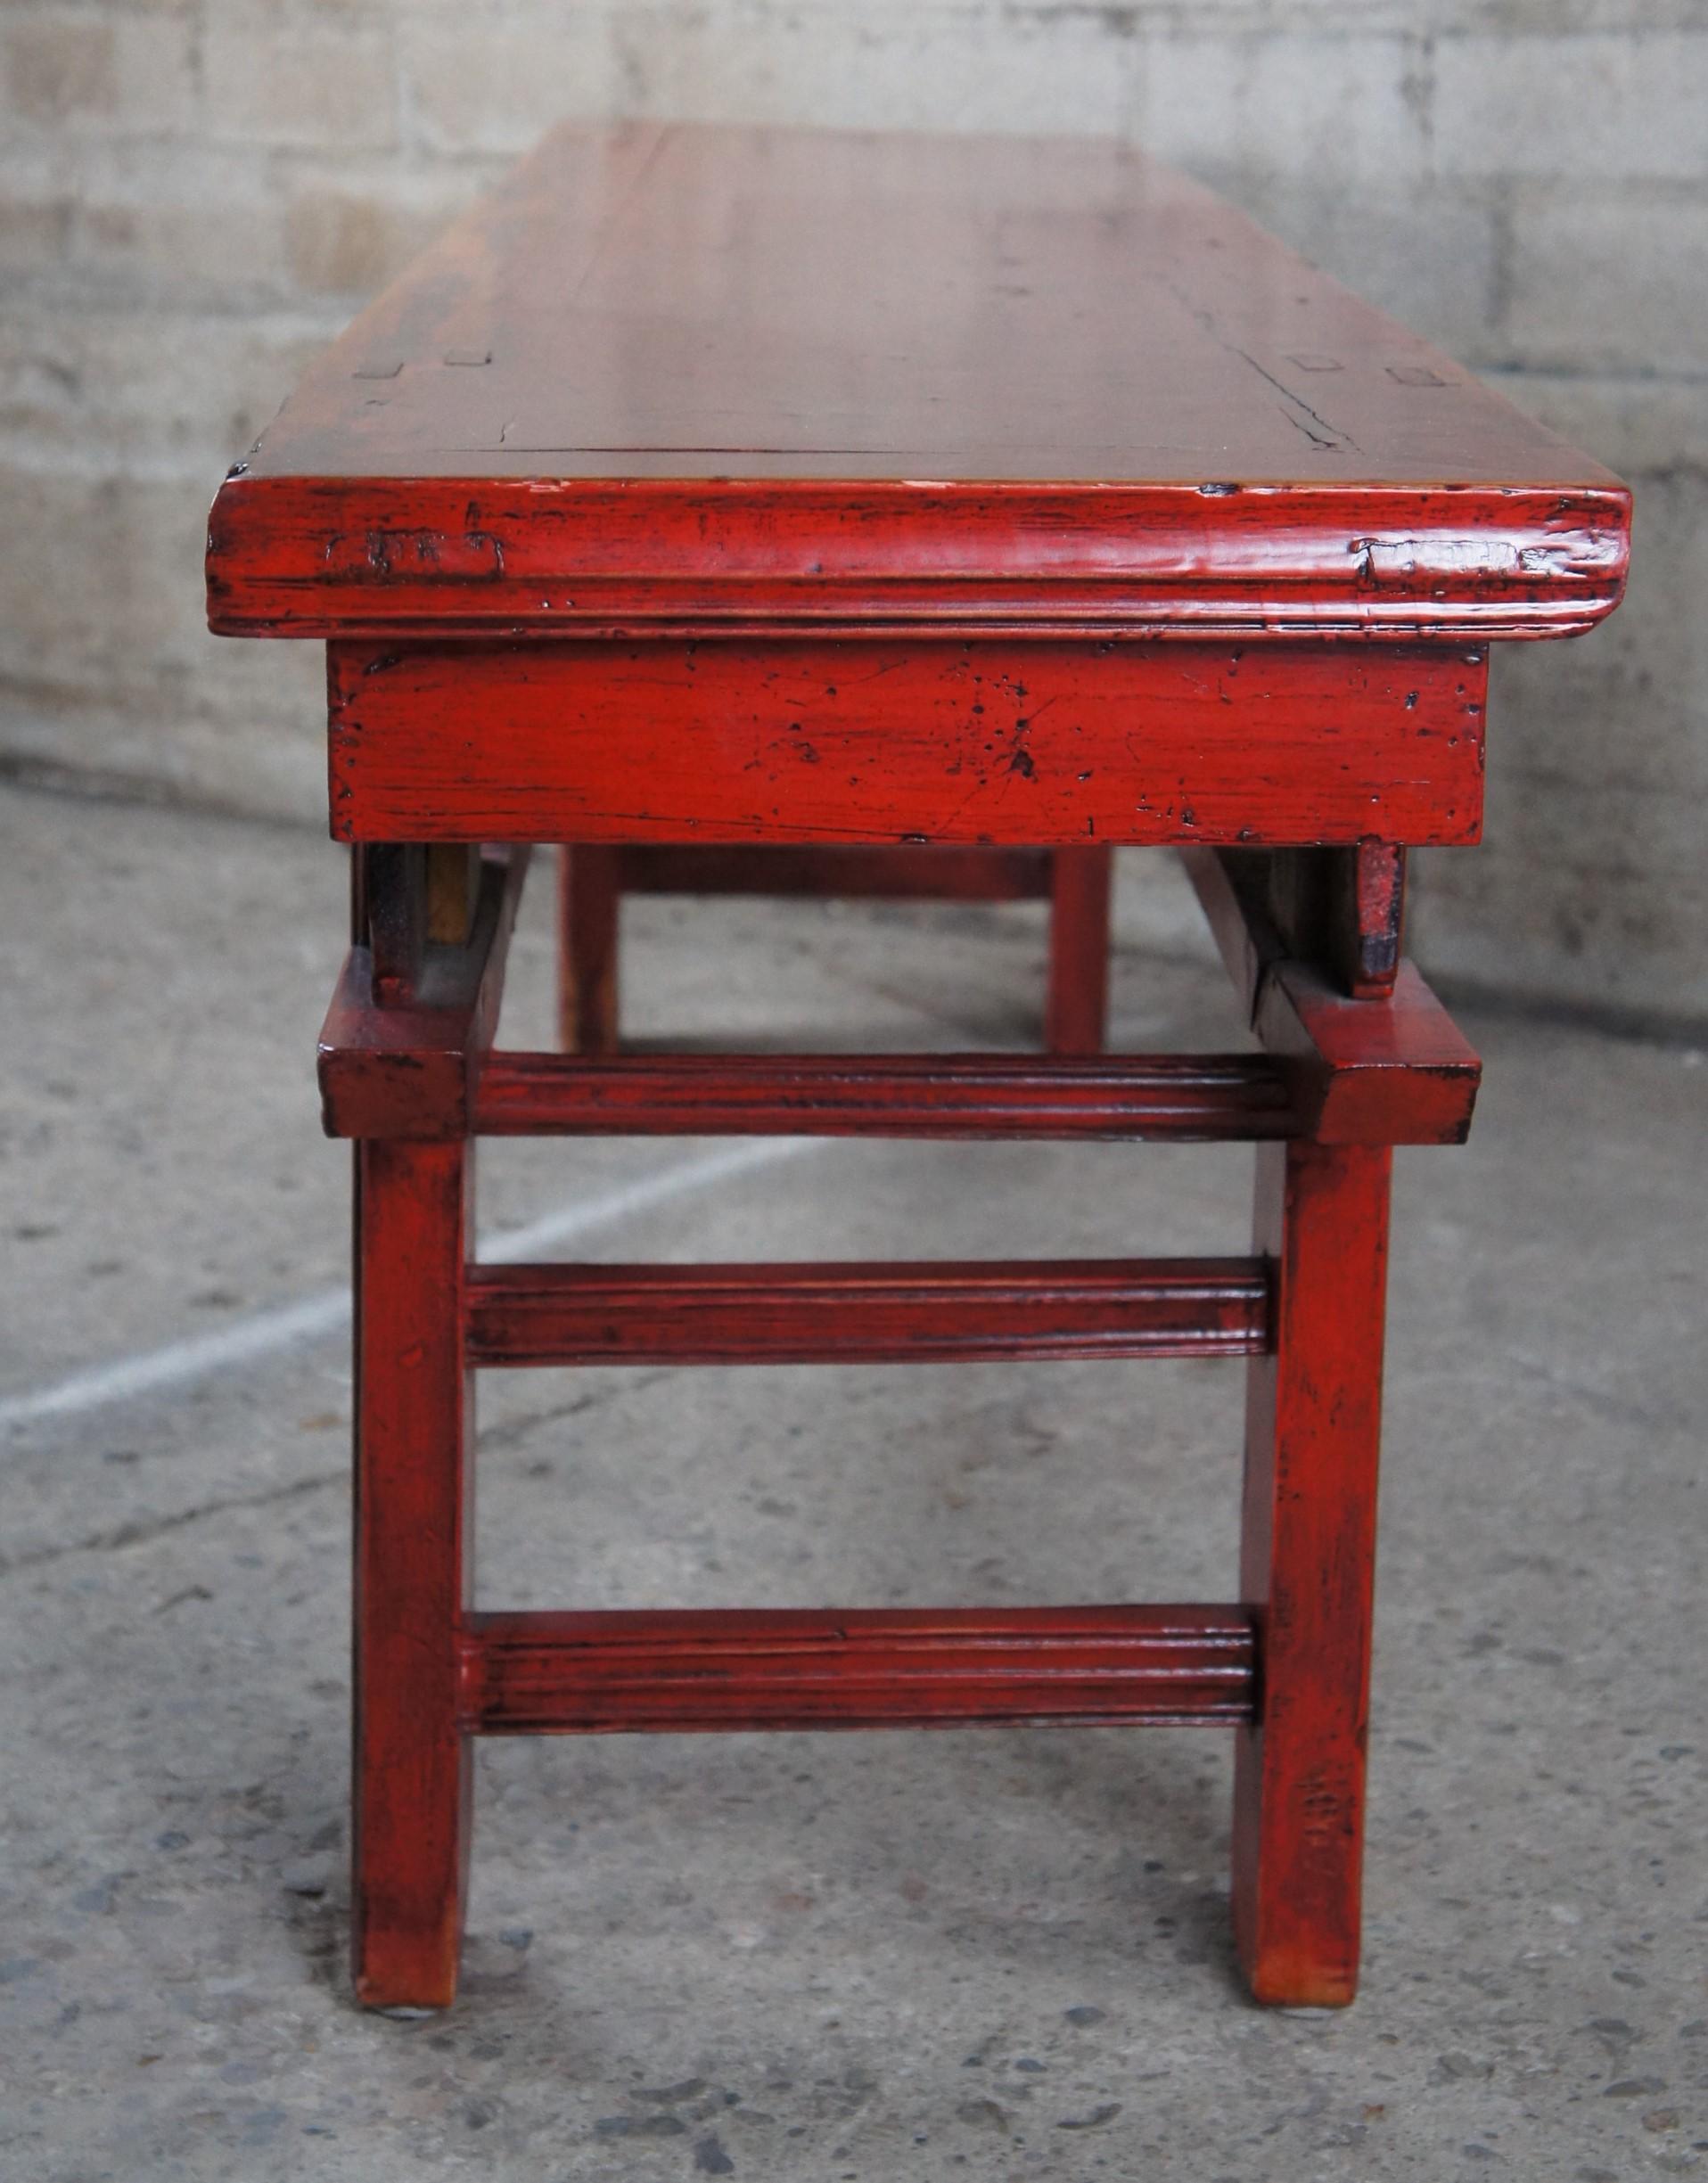 20th Century Chinese Elm Red Lacquer Chinoiserie Altar Hallway Bench Seat Pew For Sale 3